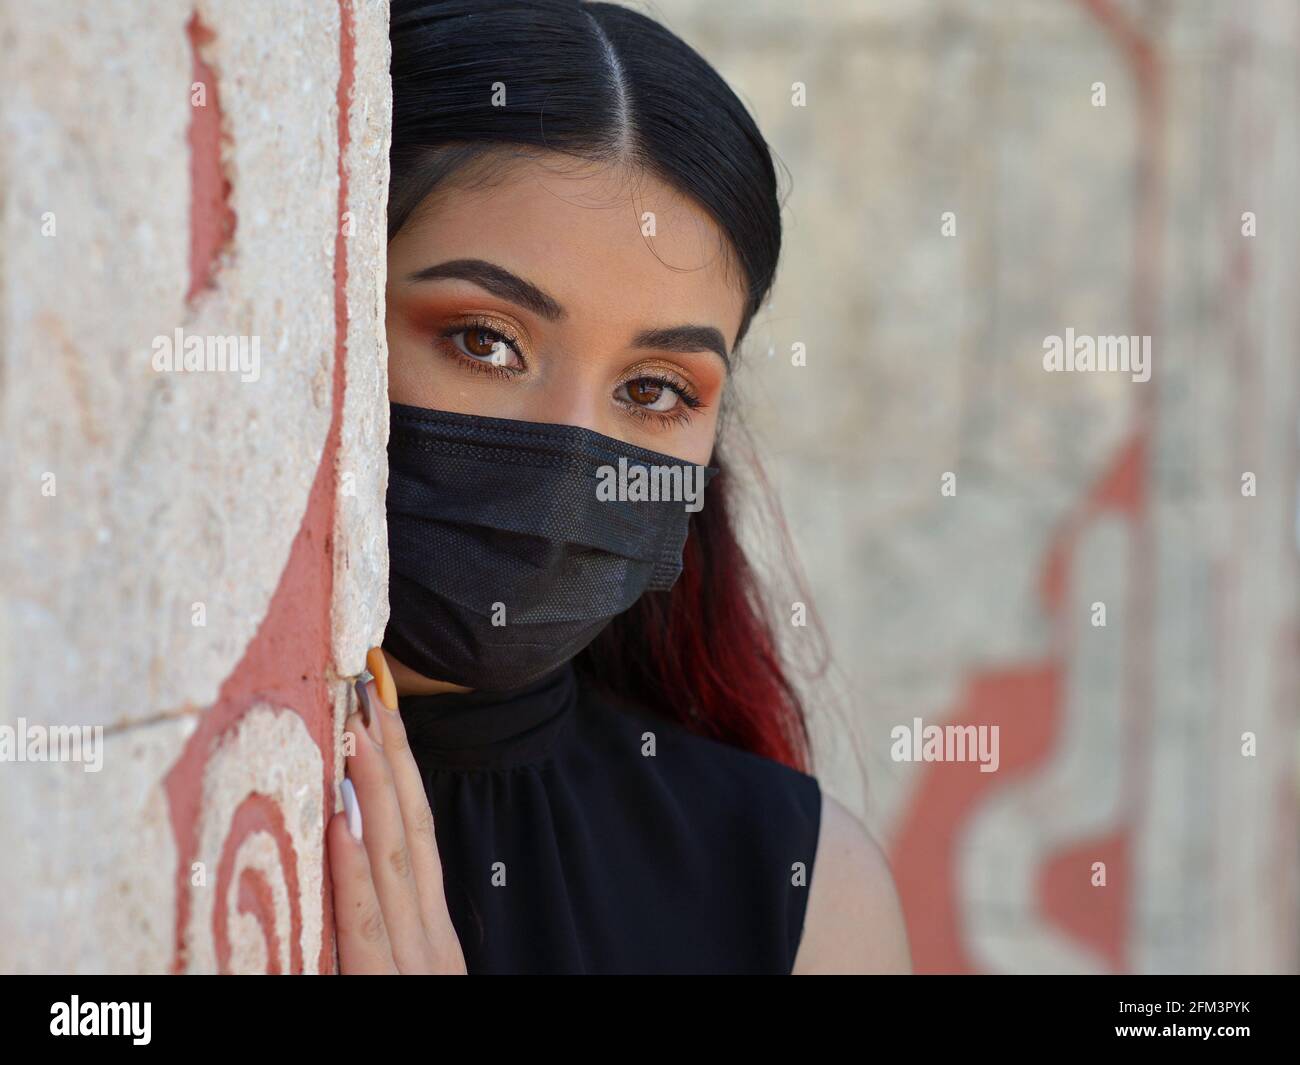 Beautiful Caucasian Mexican model with eye makeup and black outfit wears a black medical face mask and looks around the corner of a stone wall. Stock Photo